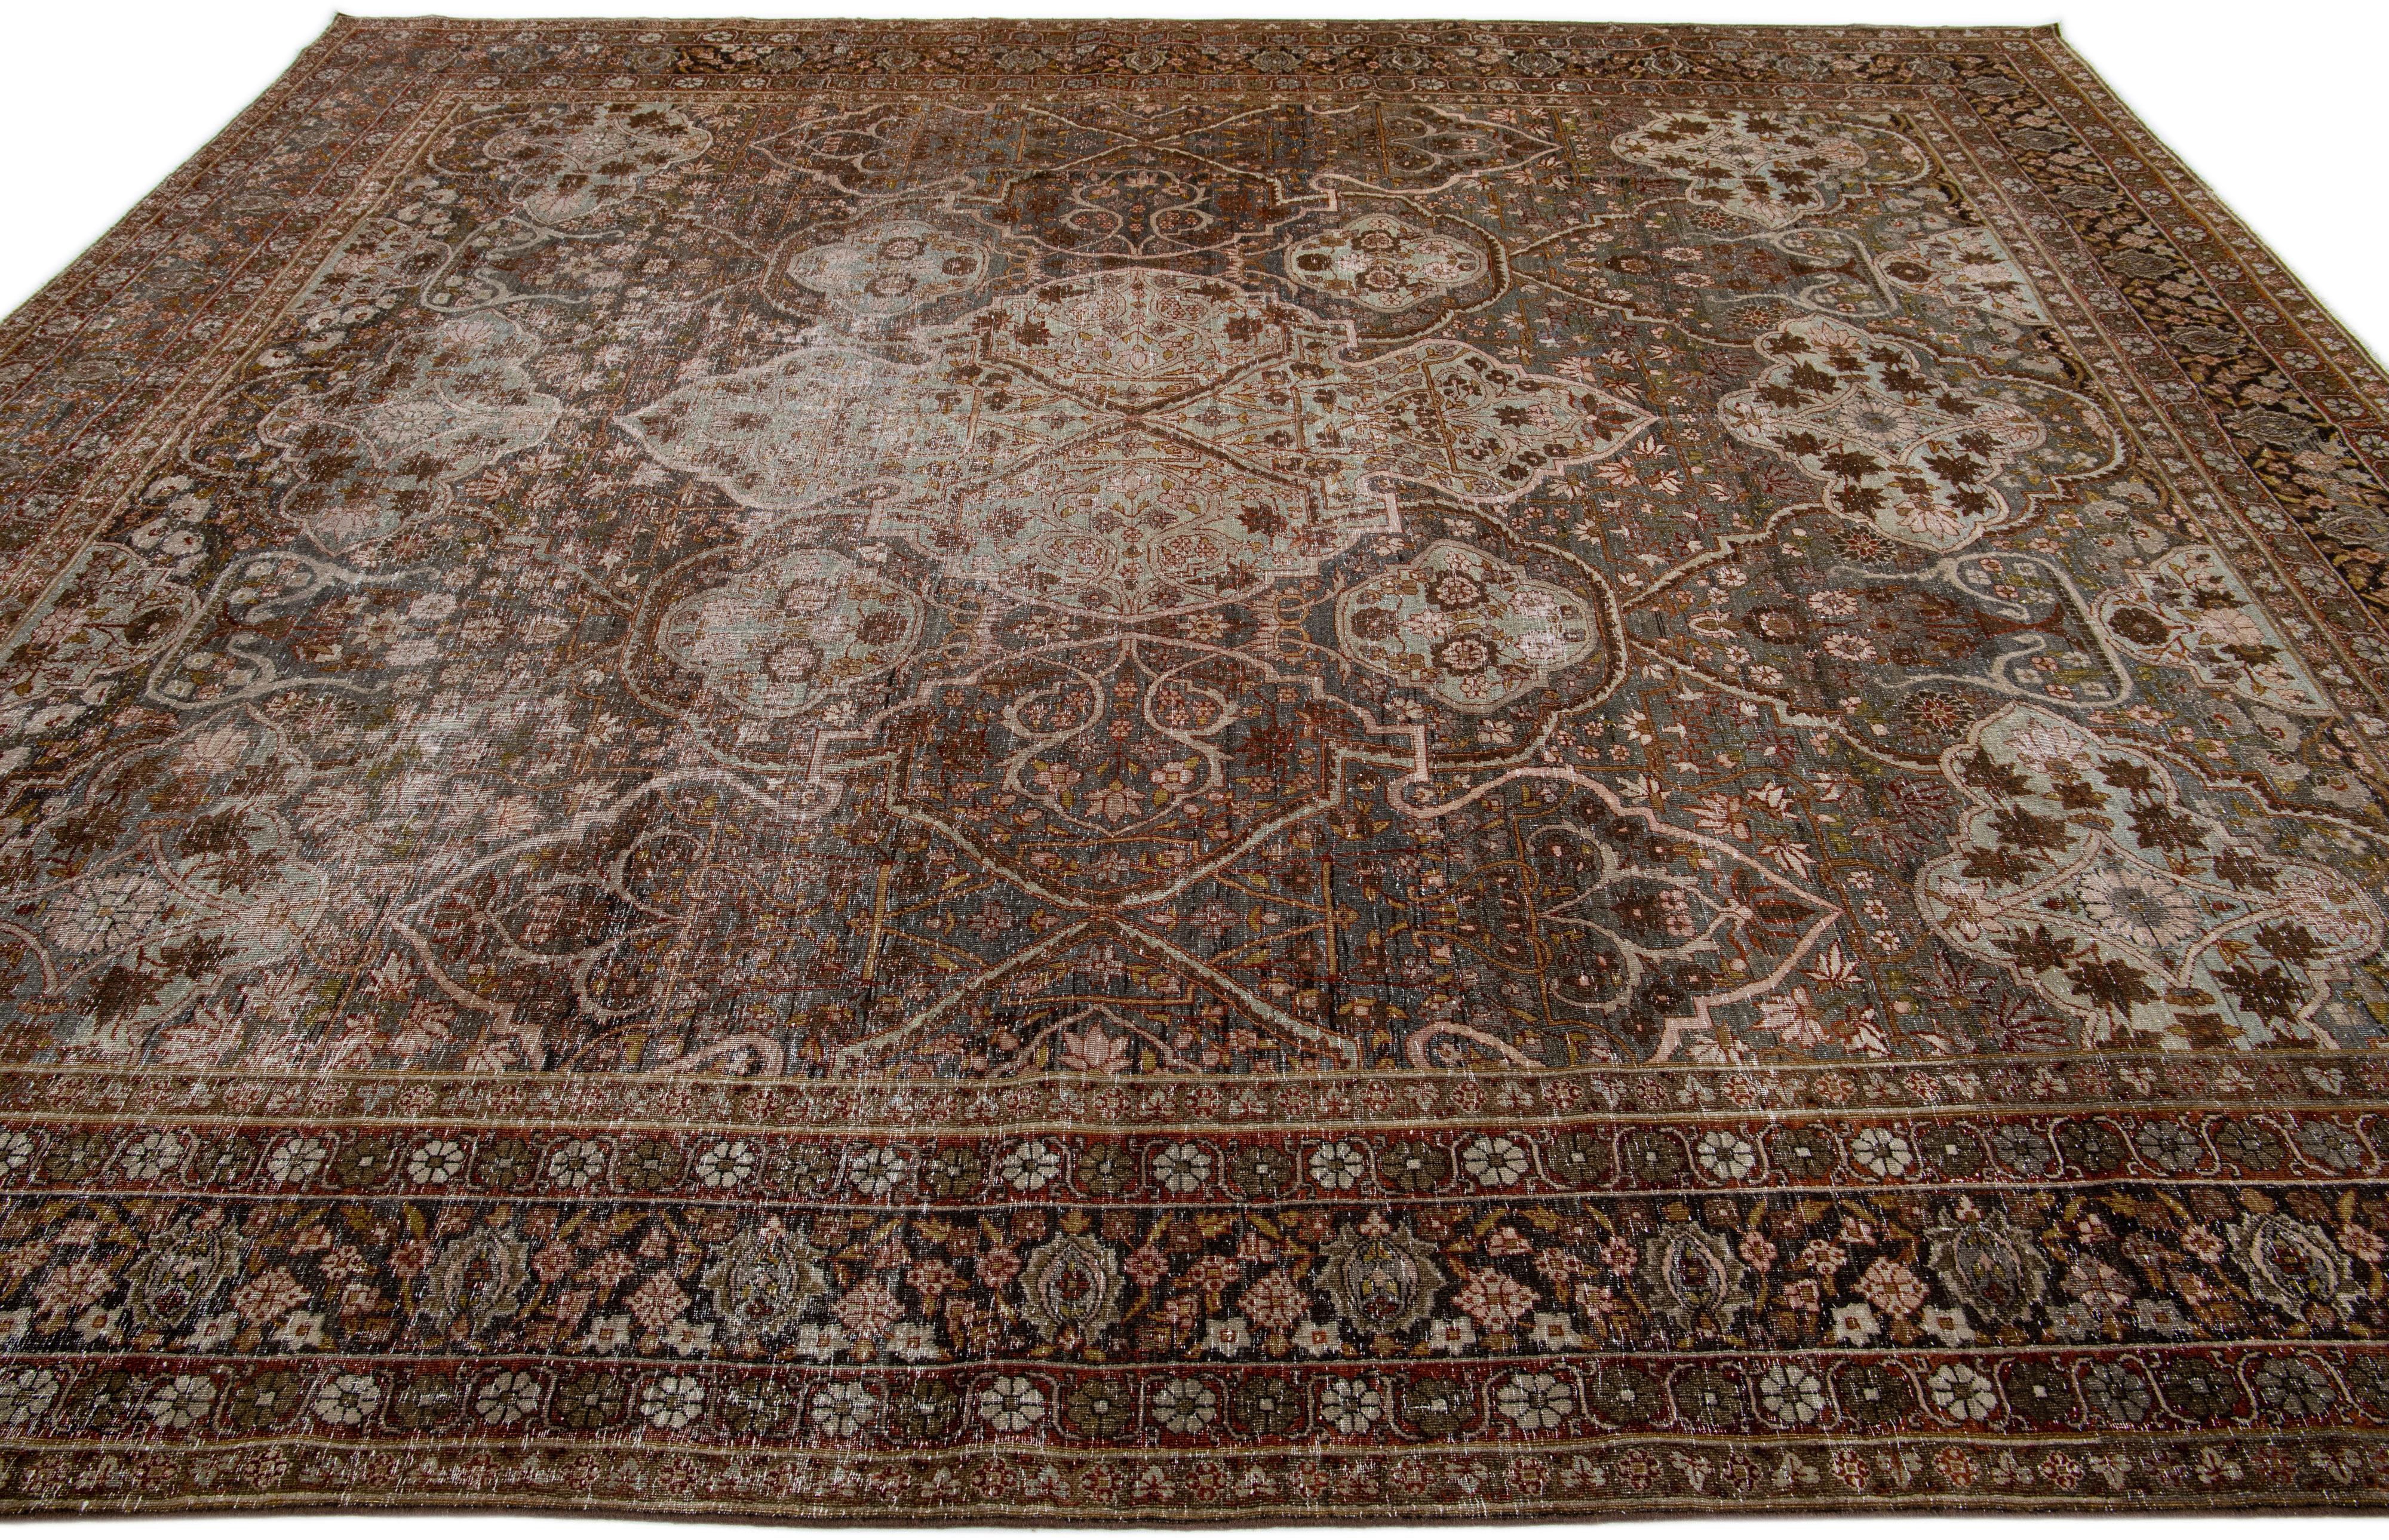 1900s Persian Tabriz Gray Wool Rug Handmade with Medallion Motif In Good Condition For Sale In Norwalk, CT